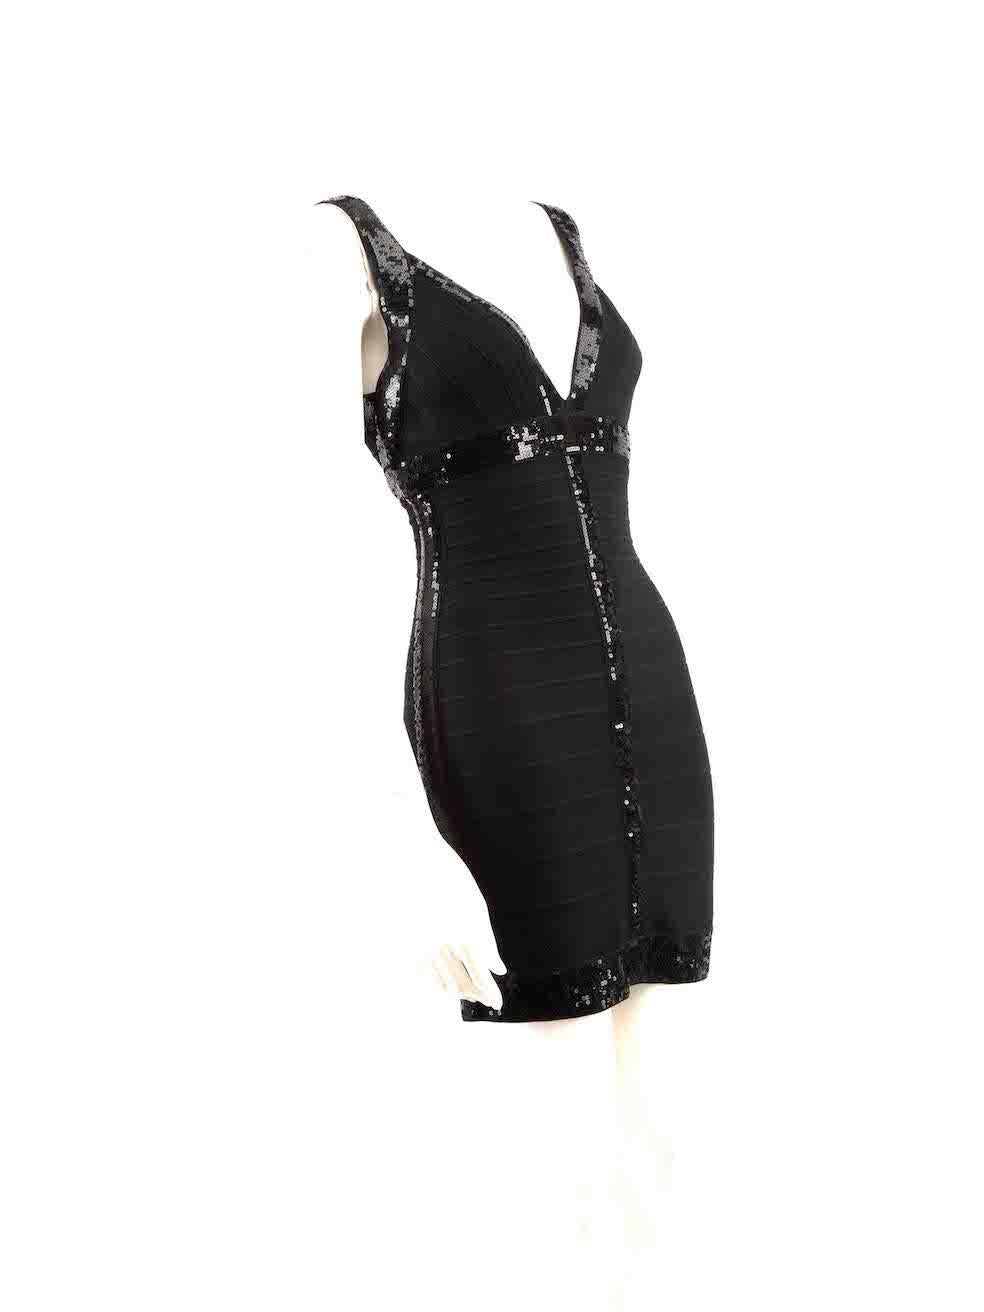 CONDITION is Good. General wear to dress is evident. Moderate signs of wear to the bust with pilling to the weave and there are sequins missing to the embellishment on this used Herve Leger designer resale item.
 
 
 
 Details
 
 
 Black
 
 Rayon
 
